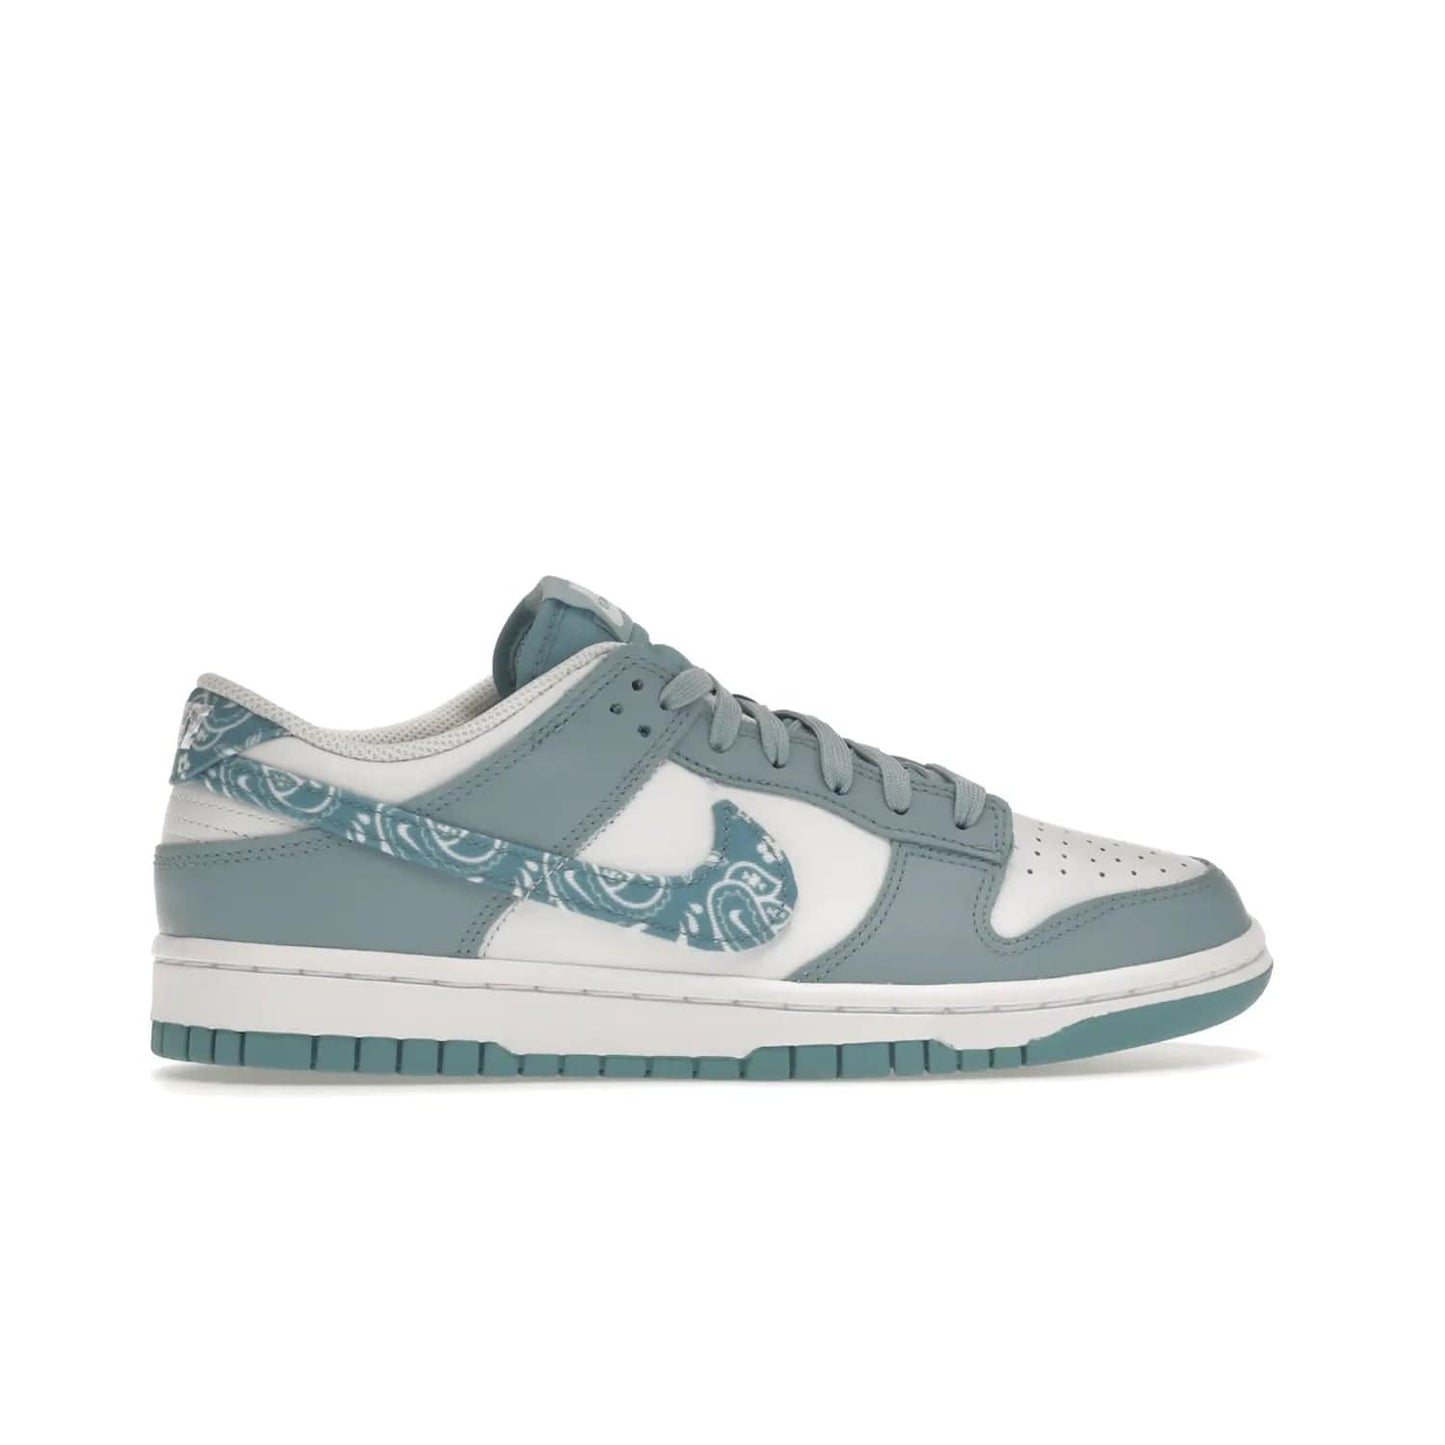 Nike Dunk Low Essential Paisley Pack Worn Blue (Women's) - Image 36 - Only at www.BallersClubKickz.com - Get the Nike Dunk Low Essential Paisley Pack Worn Blue (Women's) for style and comfort. White leather construction, light blue leather overlays, canvas Swooshes and matching heel tabs offer a rich blue hue. Finished by a white and light blue sole, this classic Nike Dunk is the perfect addition to any wardrobe. Released in March 2022.